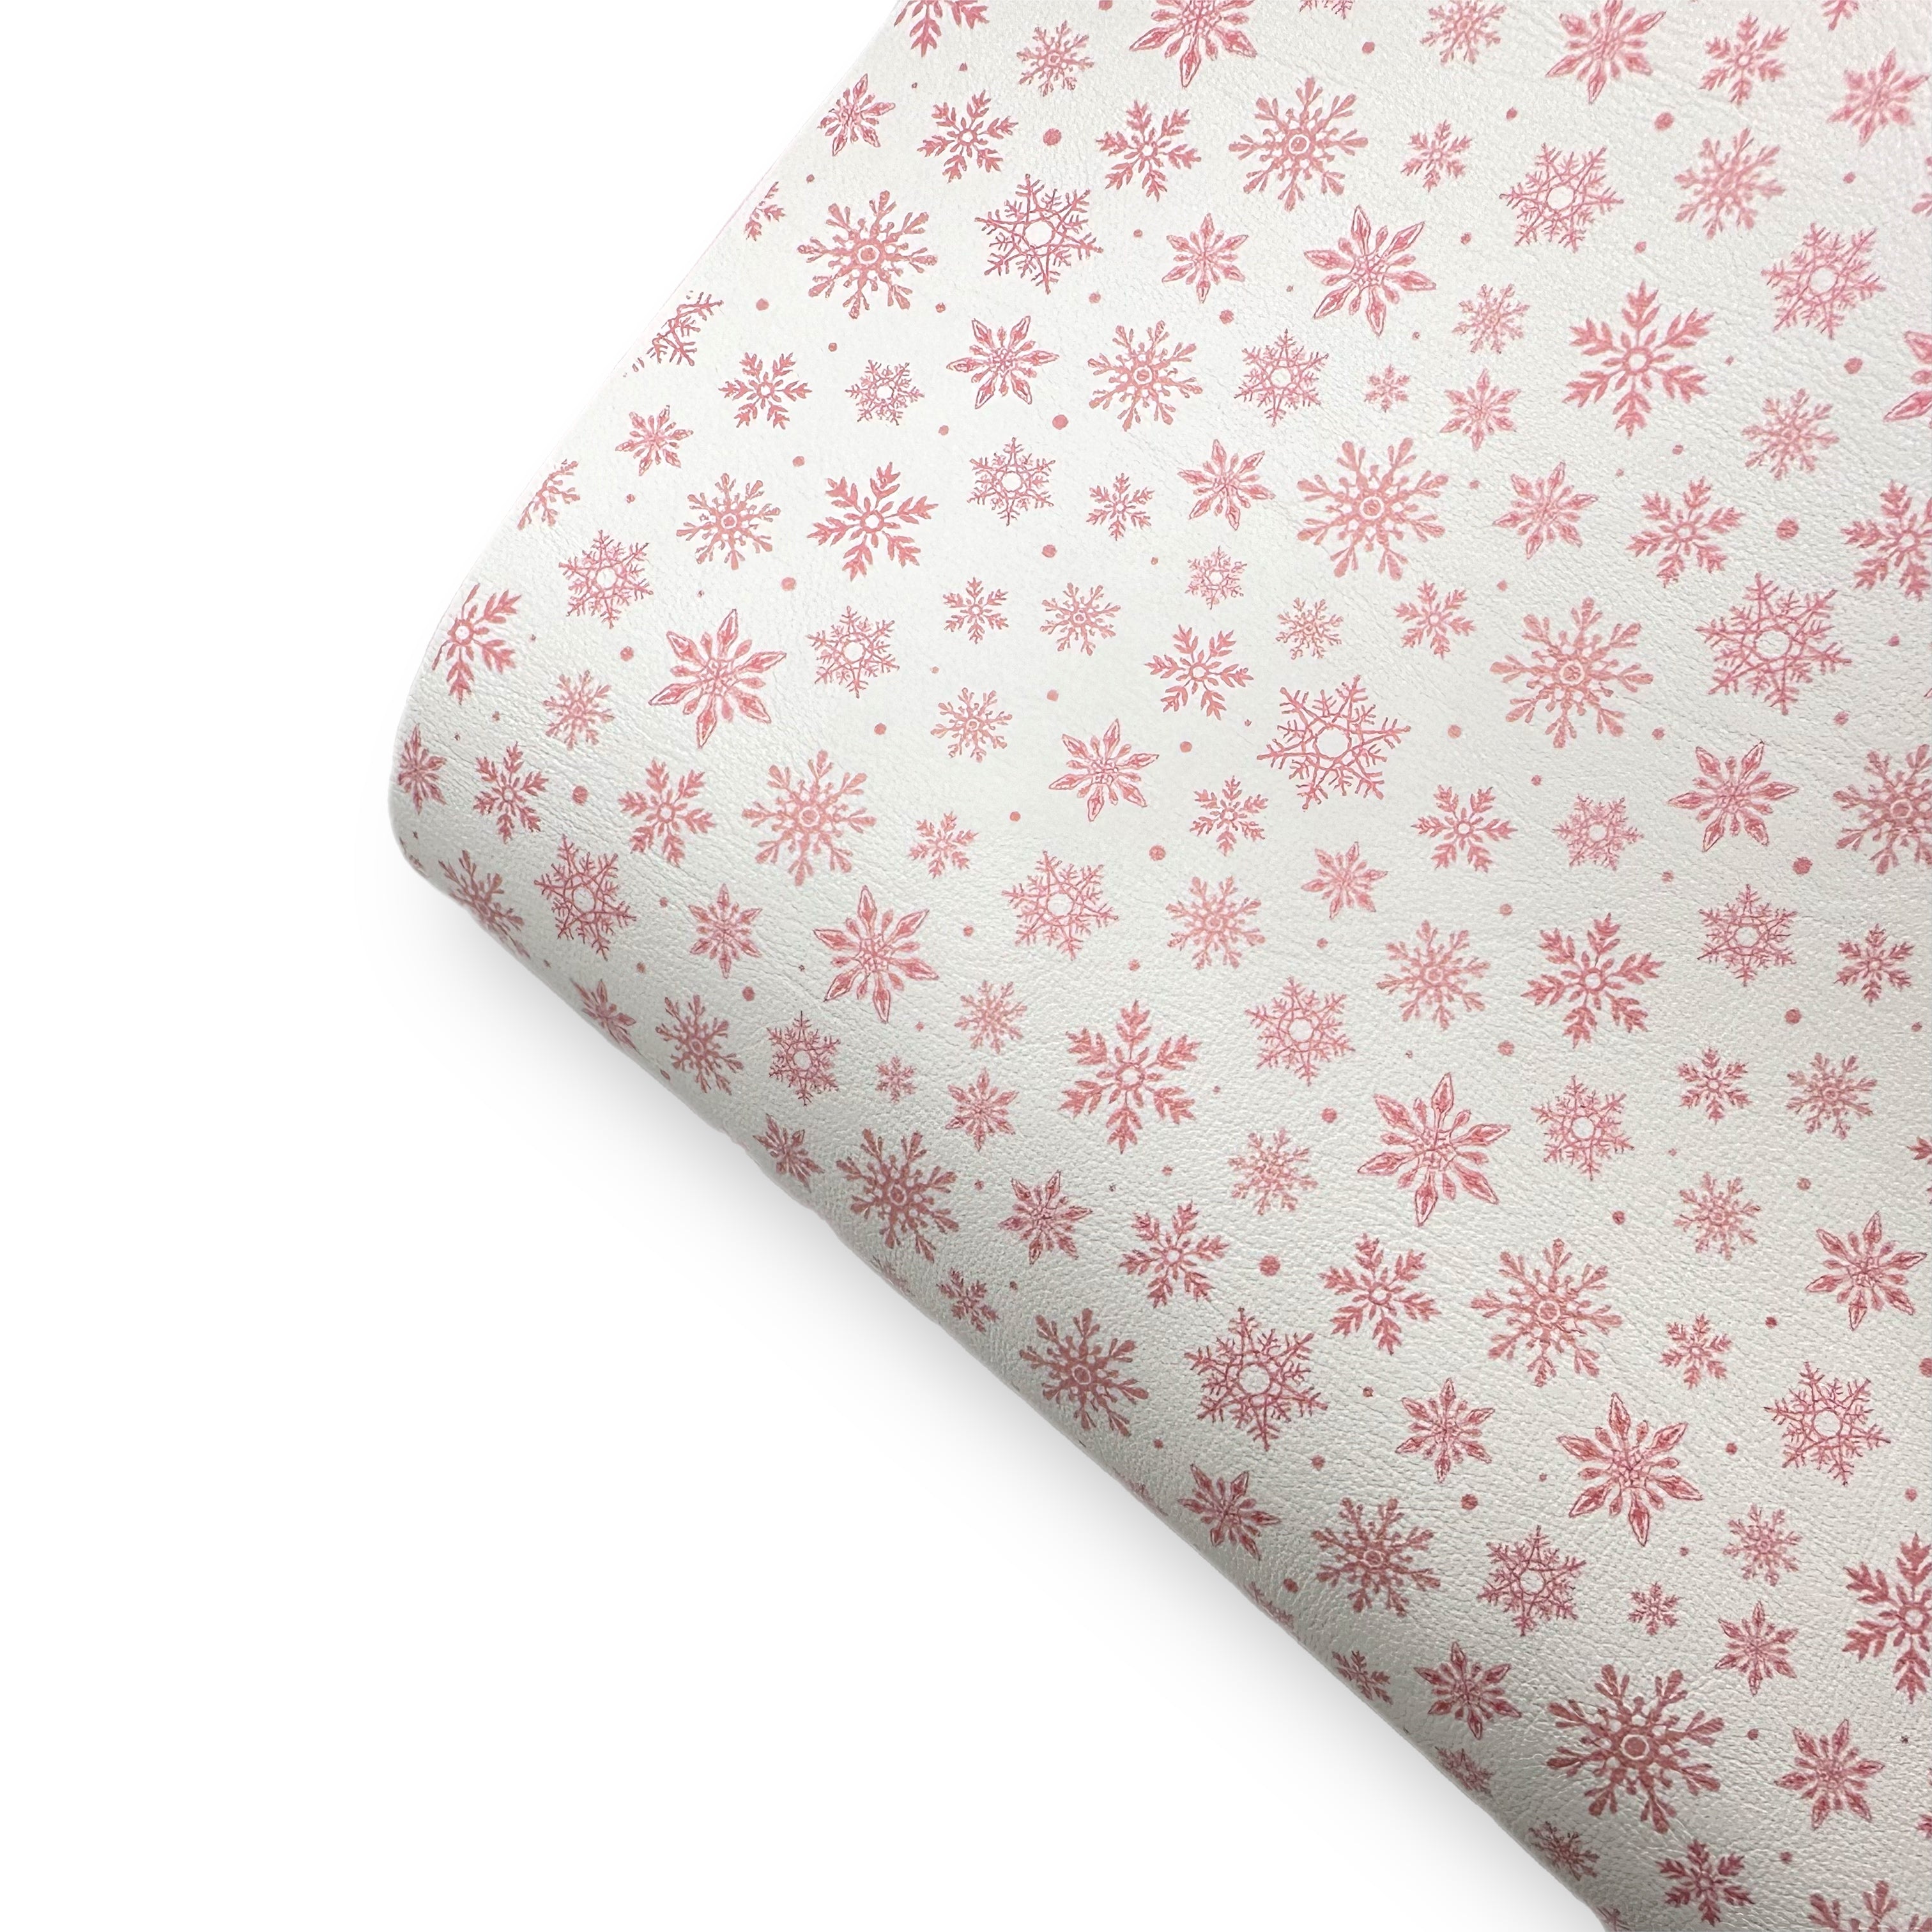 Pink Snow Fall Premium Faux Leather Fabric Sheets